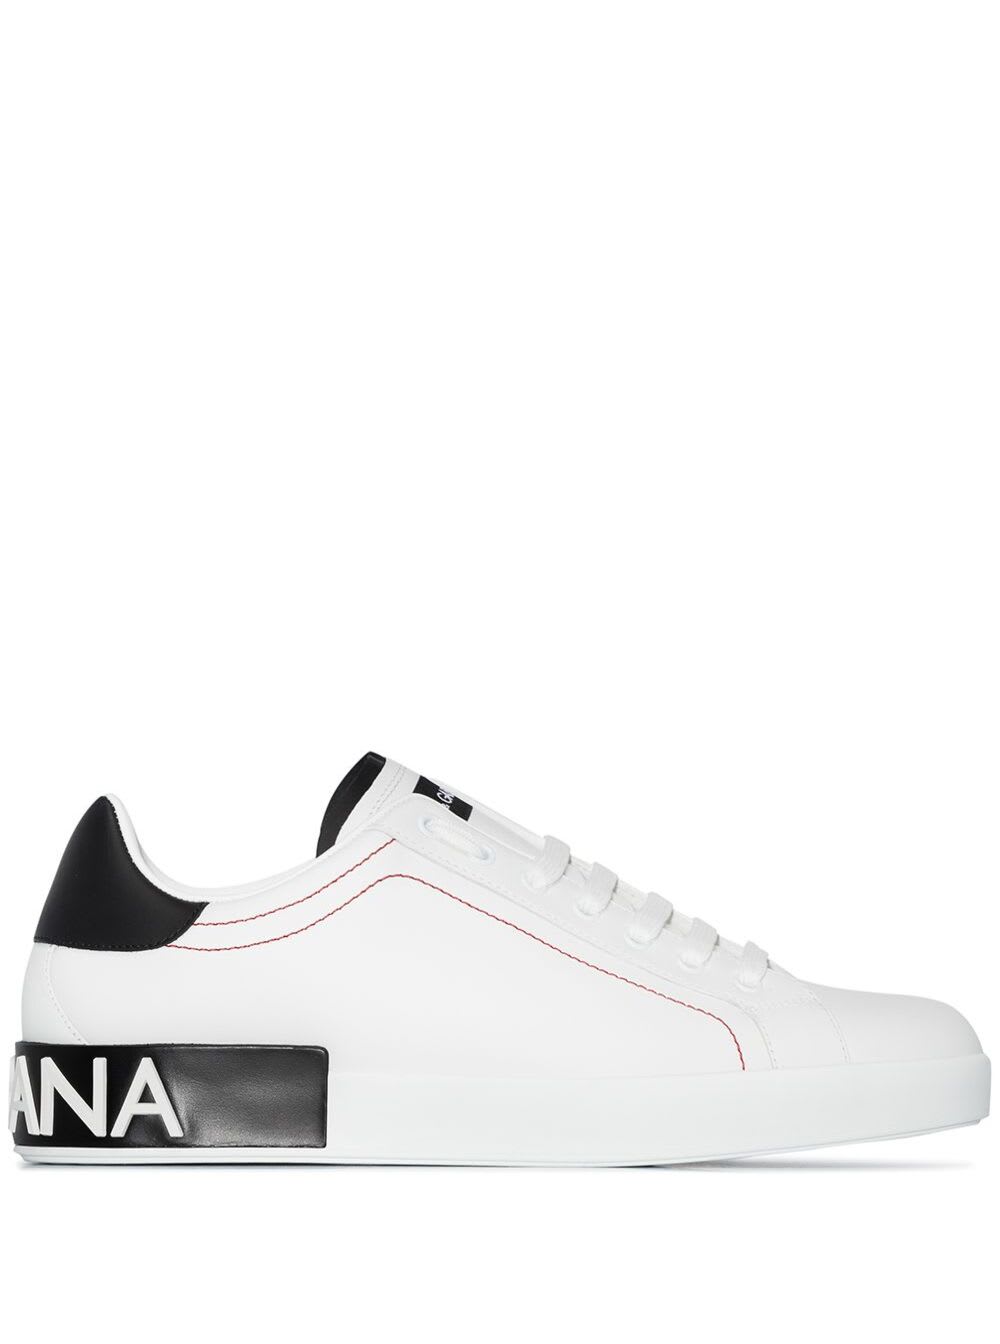 Dolce & Gabbana Mans Portofino White And Black Leather Sneakers With Logo